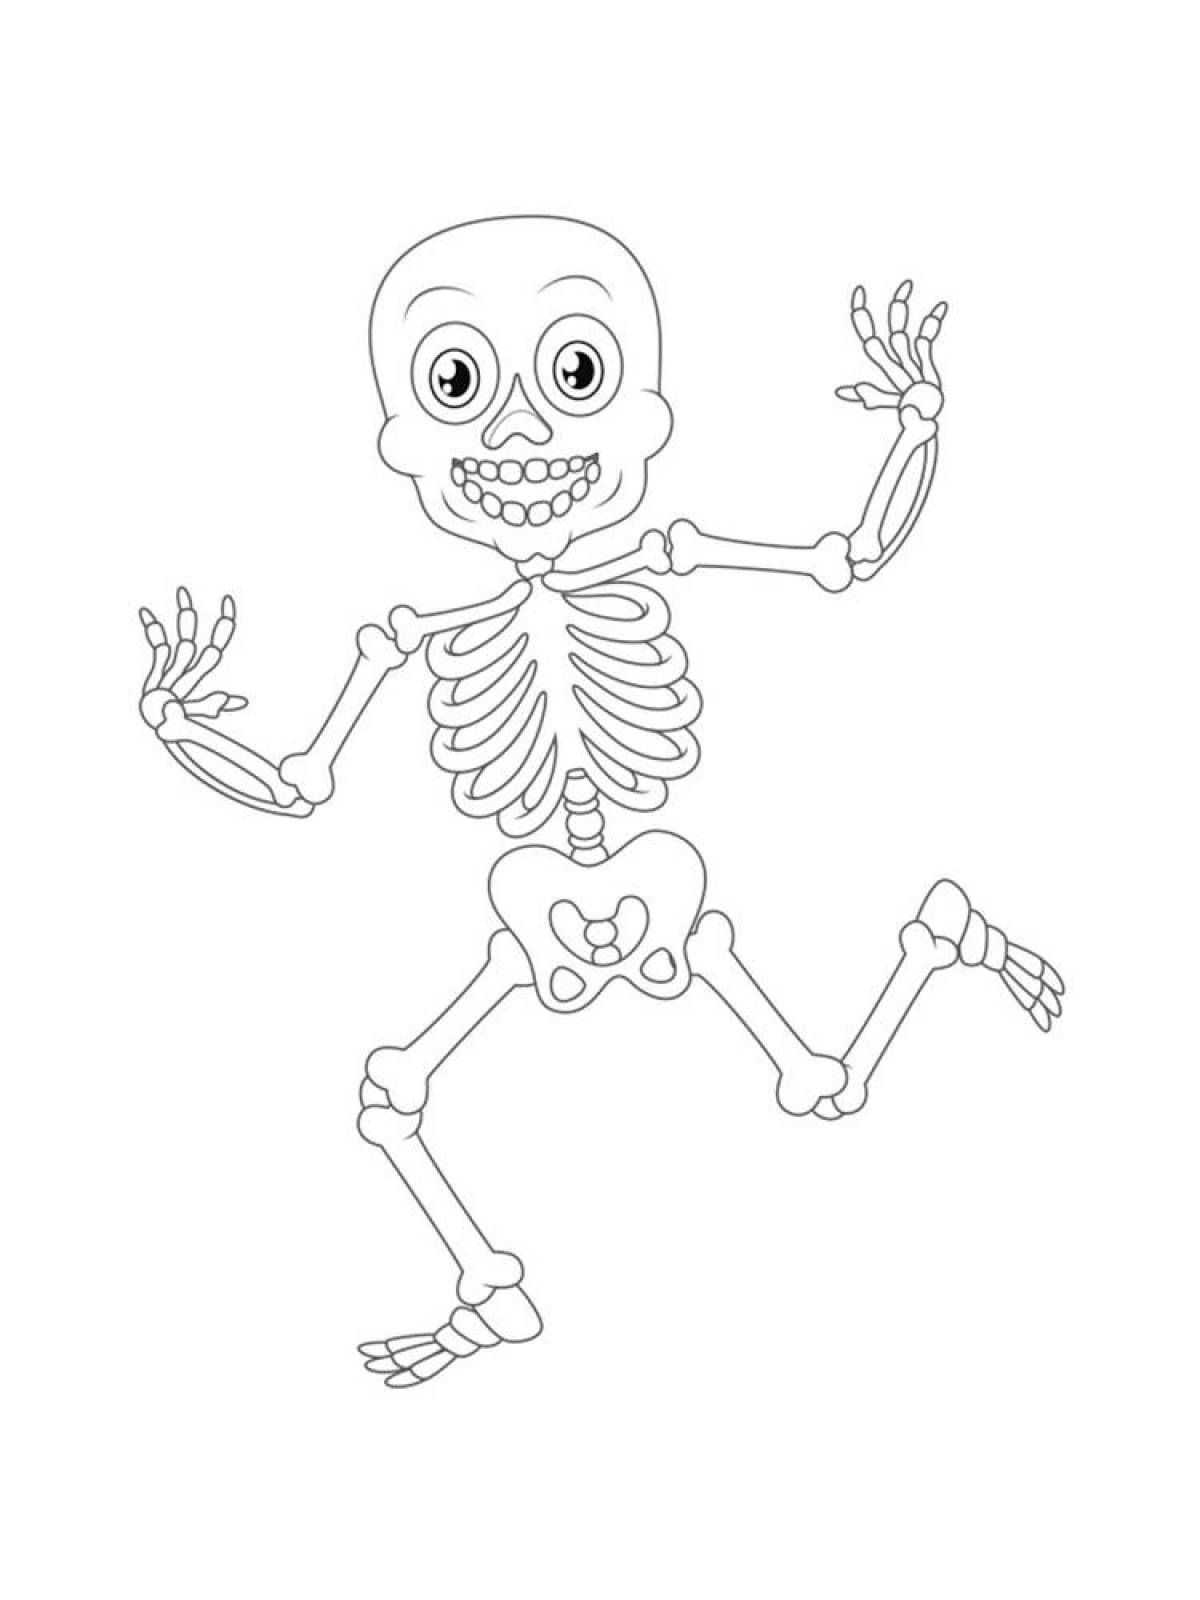 Colorful skeleton coloring page